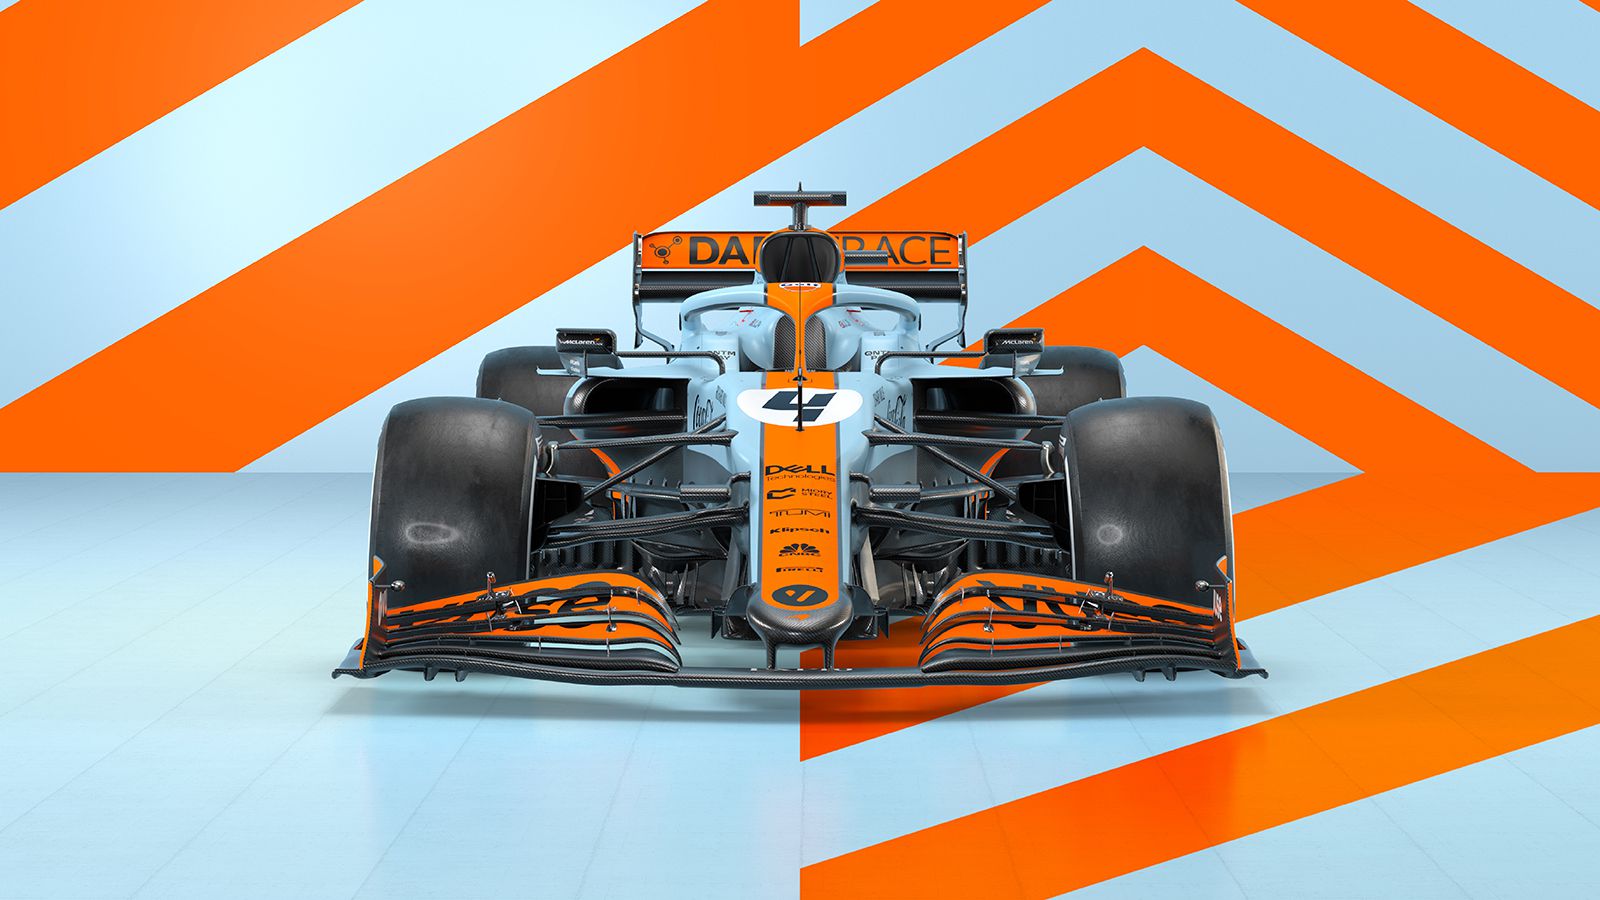 McLaren Racing Racing and Gulf Oil International unveil limited edition Monaco Grand Prix livery